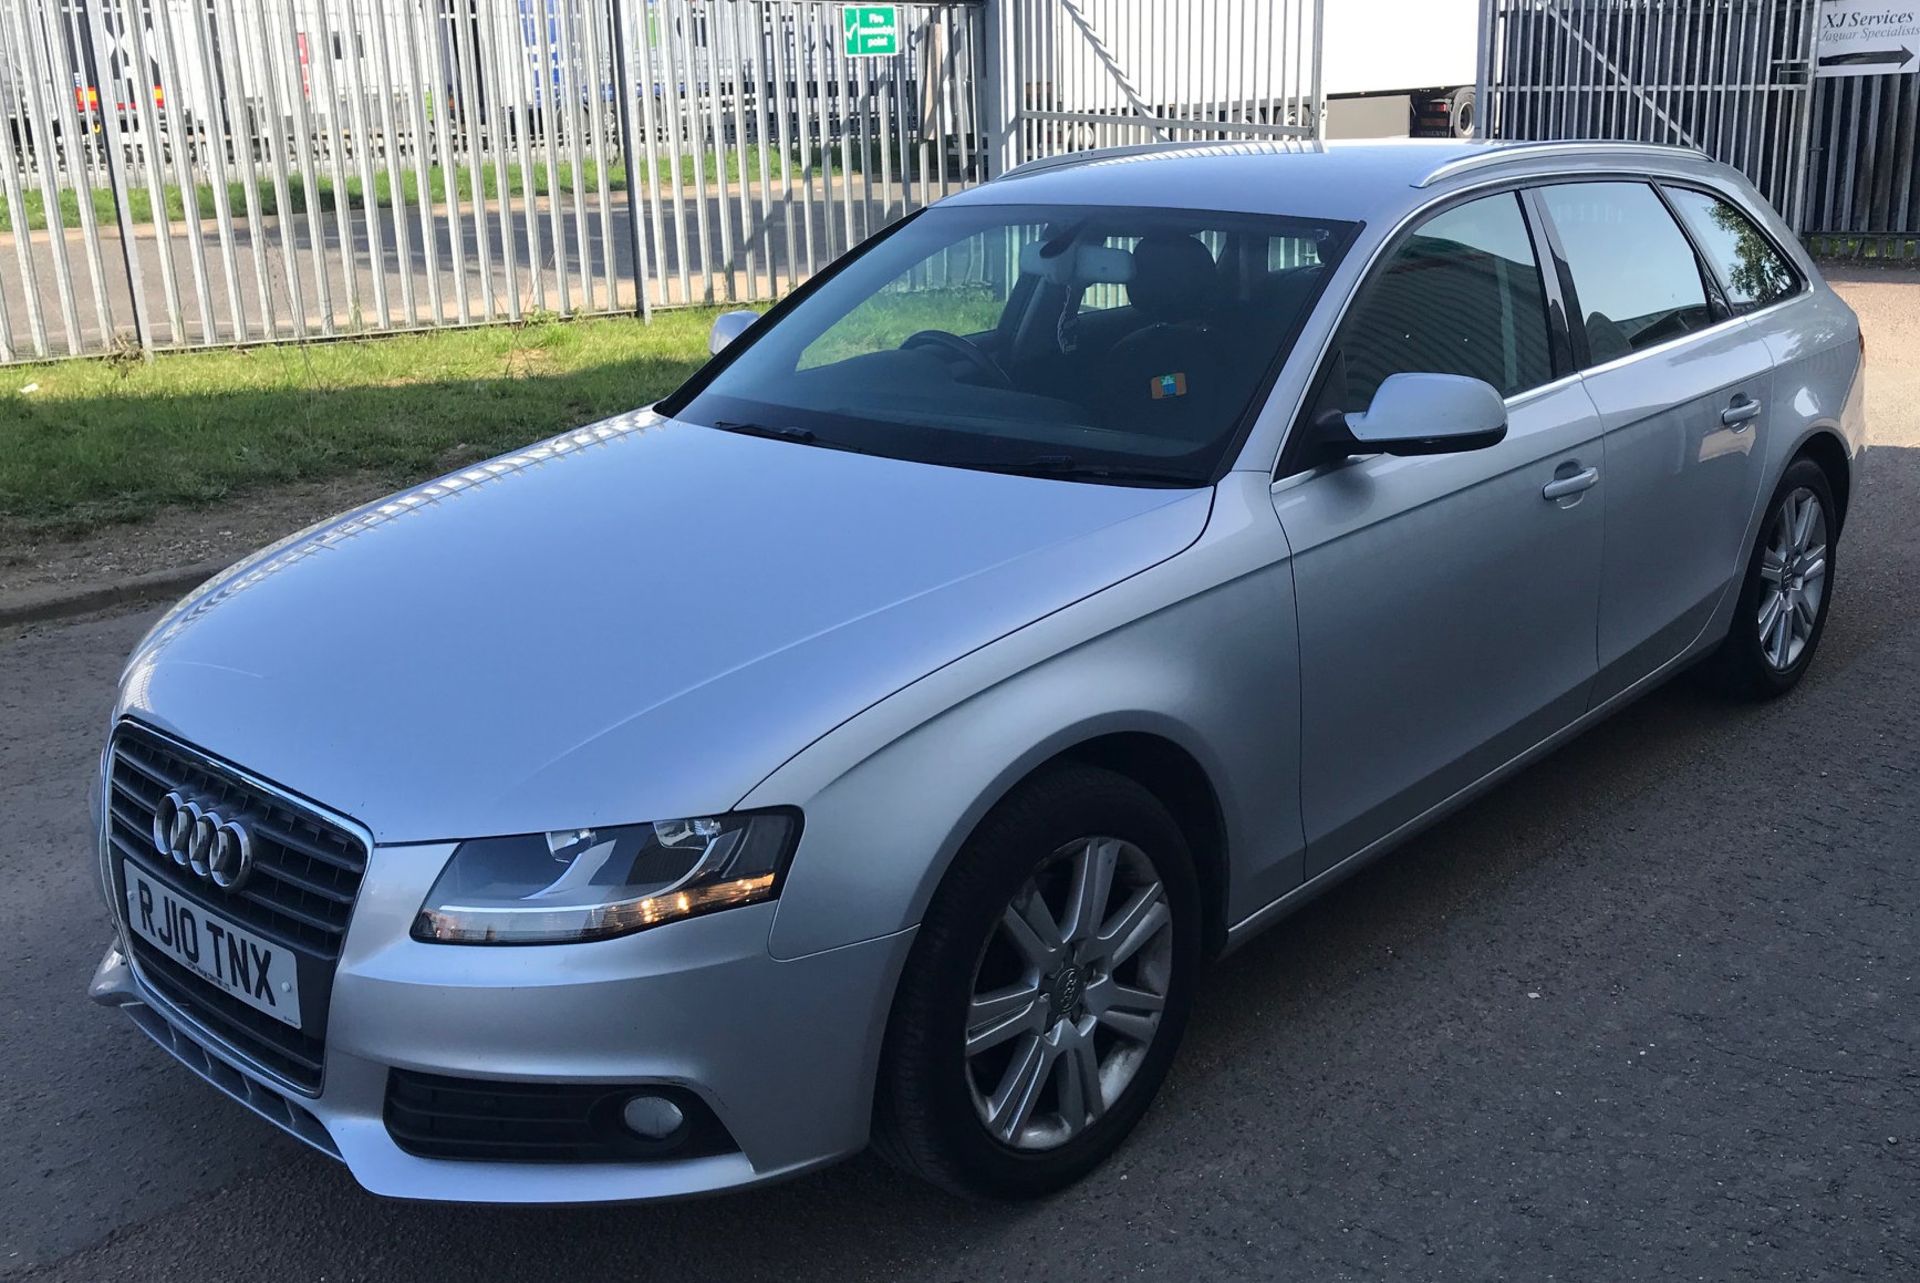 2012 Audi A4 2.0 Tdi SE Avant Automatic 5 Door Estate - CL505 - NO VAT ON THE HAMMER - Location: - Image 4 of 13